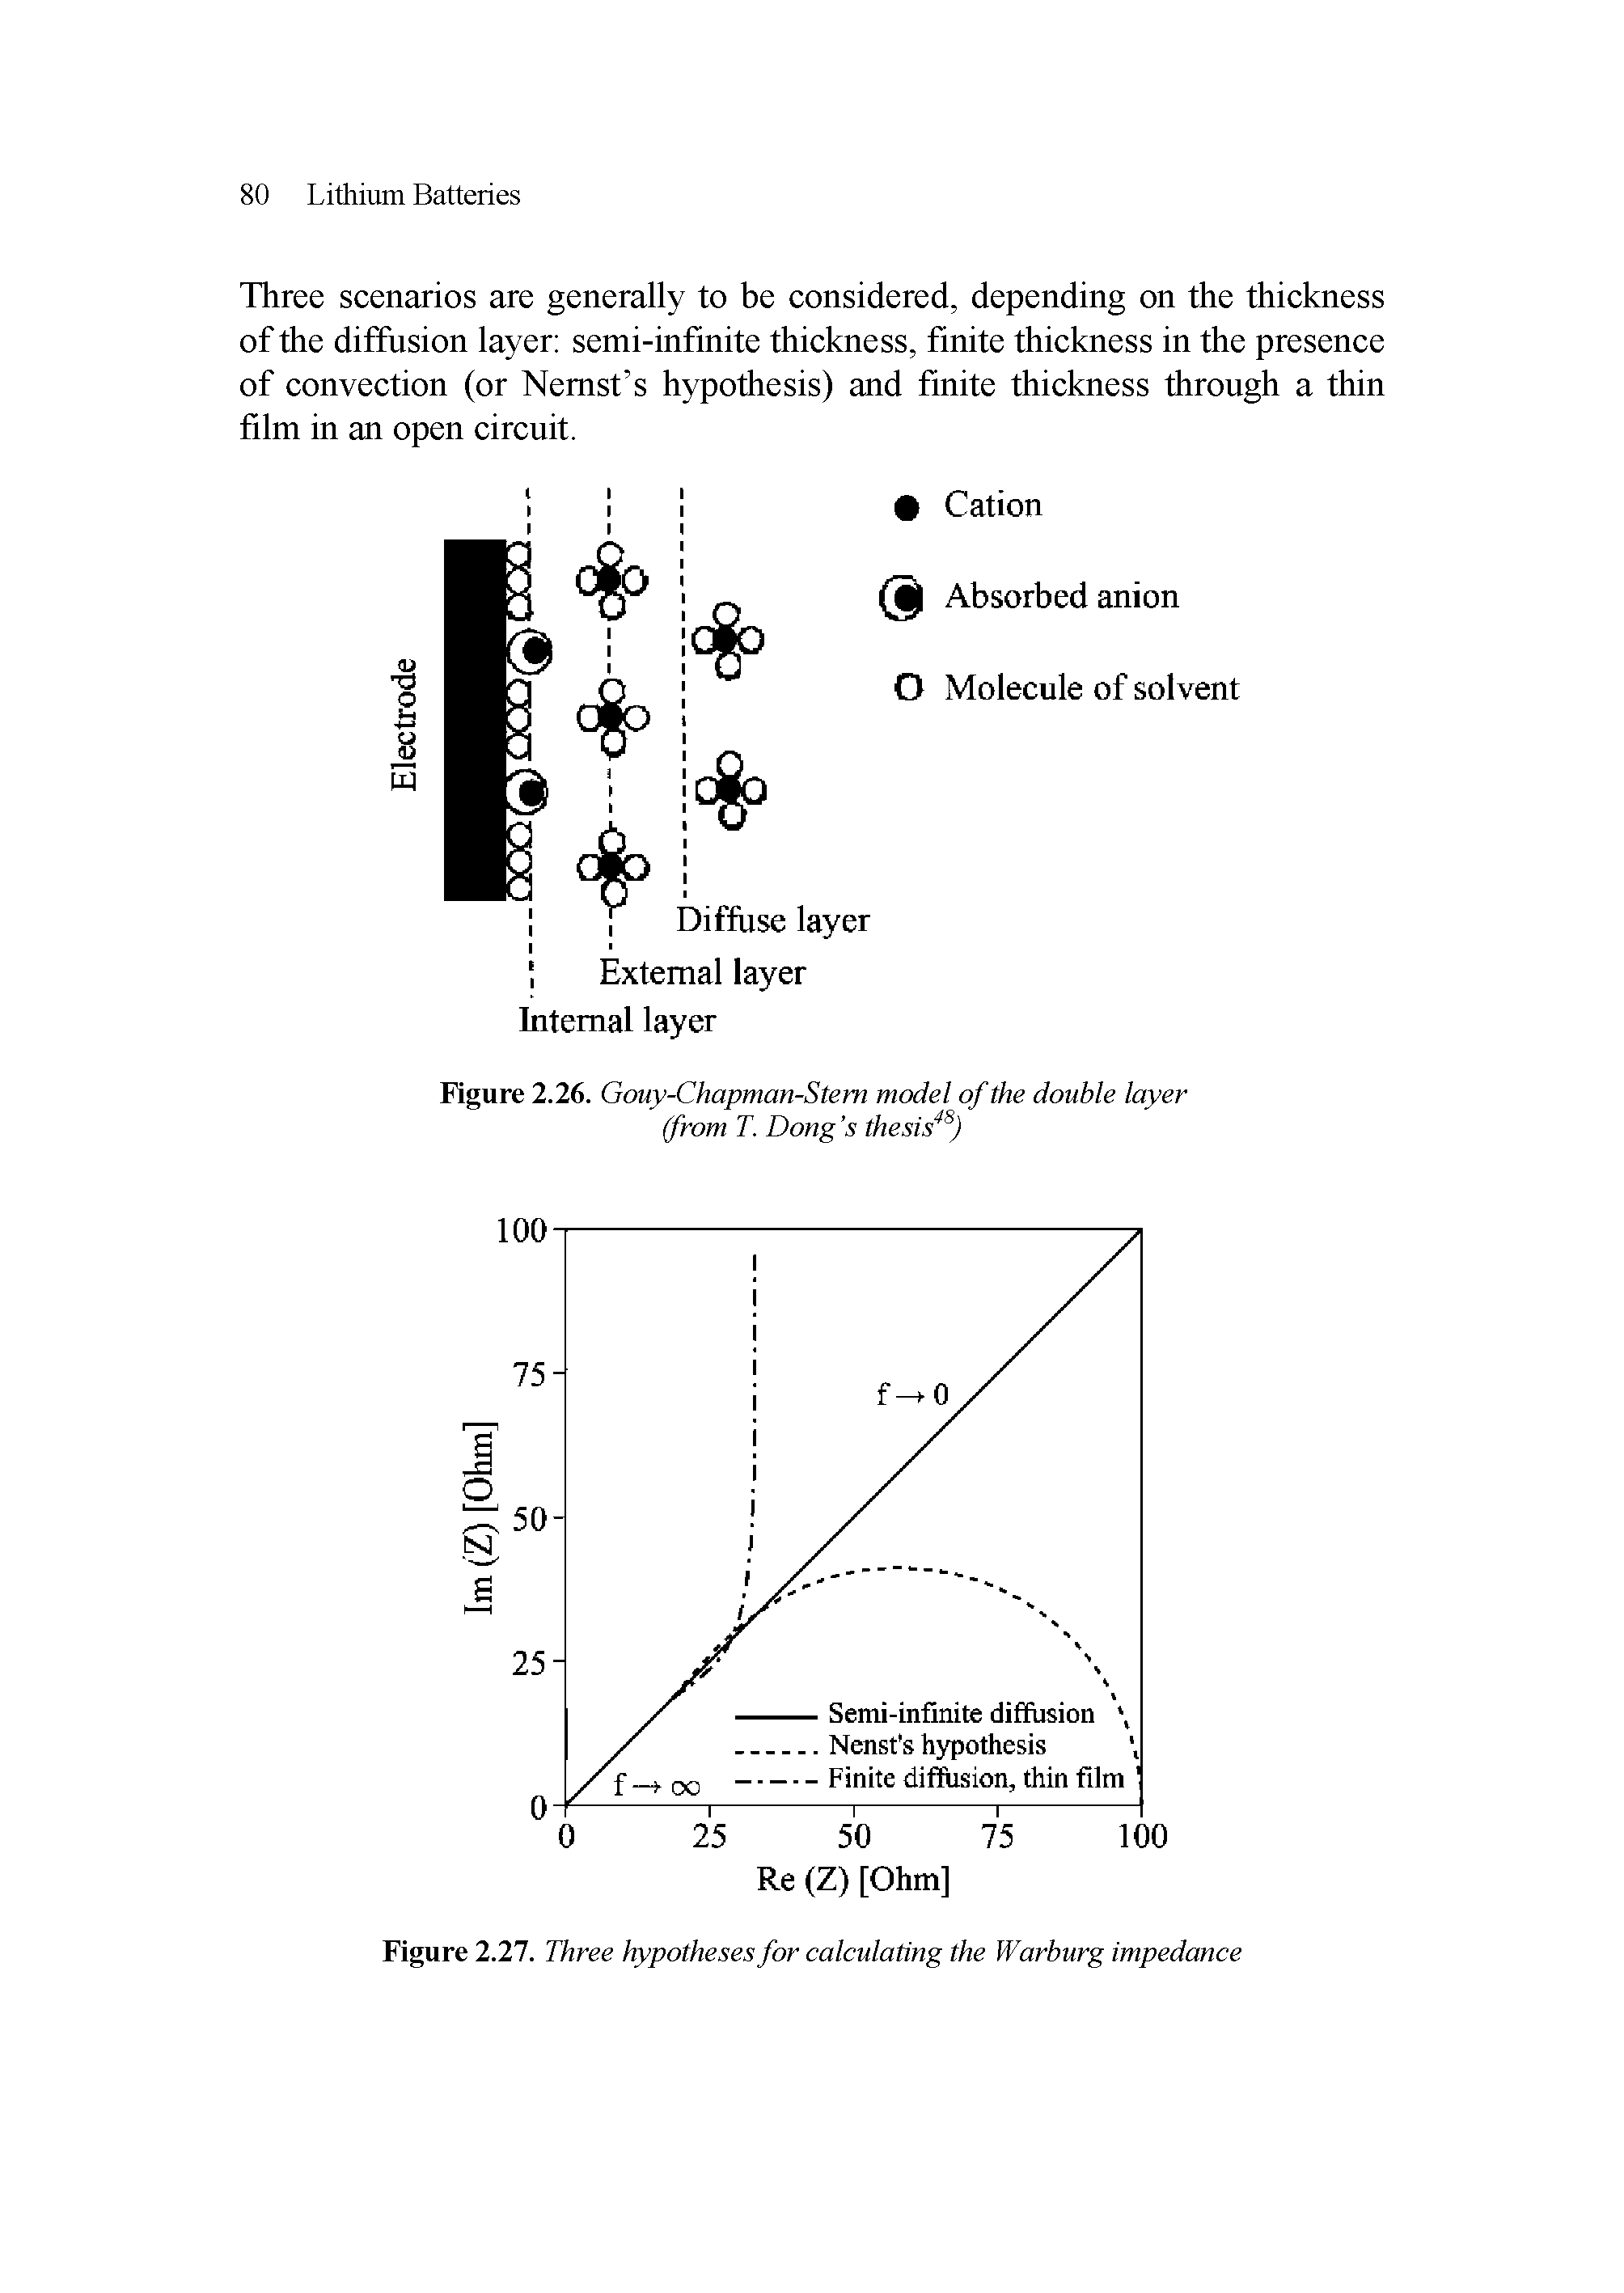 Figure 2.26. Gouy-Chapman-Stem model of the double layer from T. Dong s thesis )...